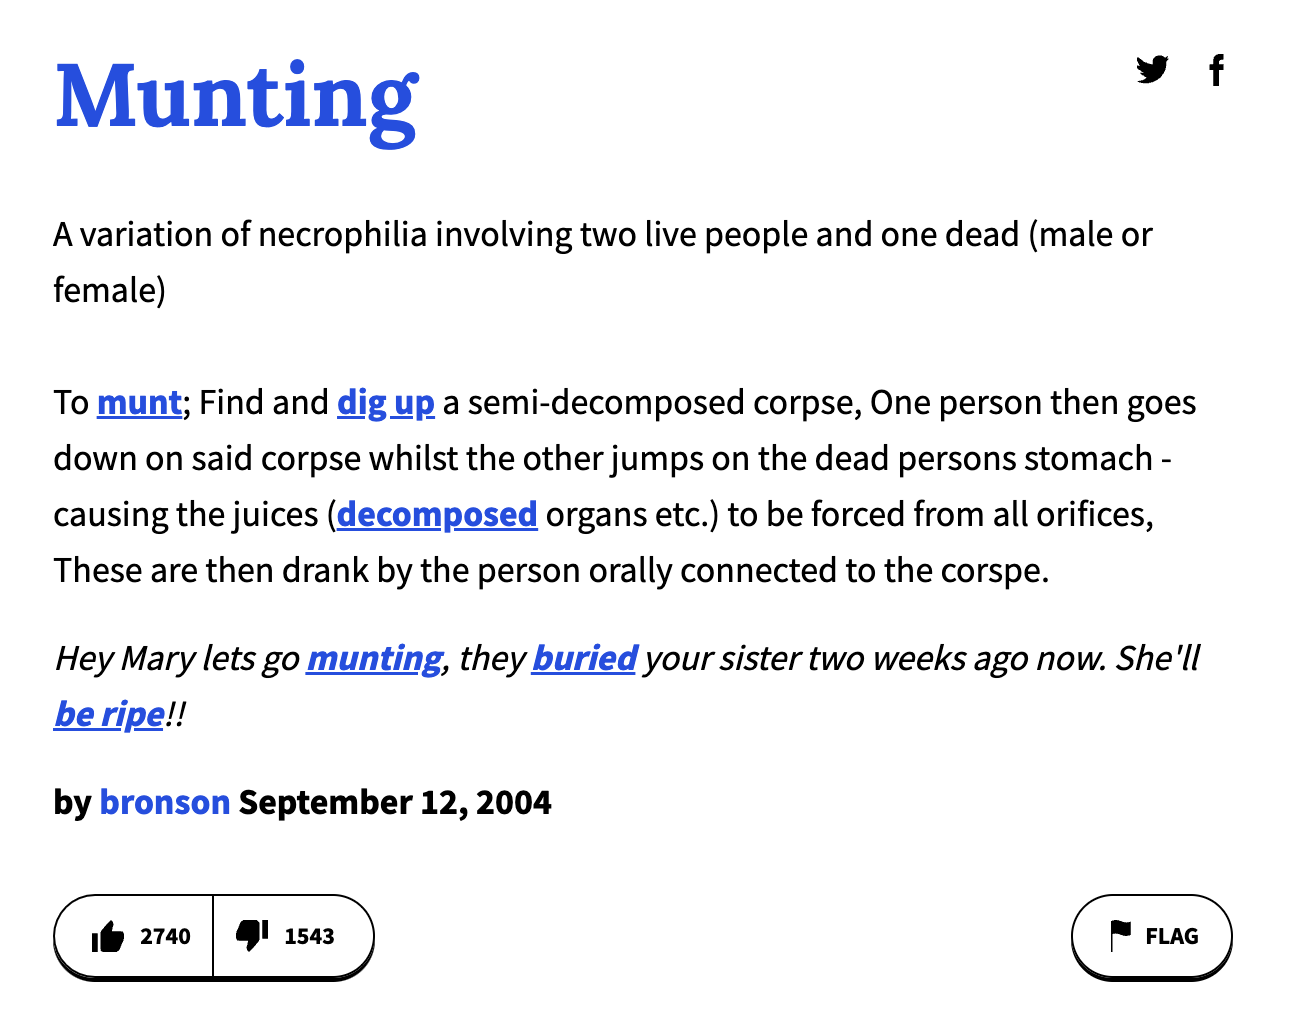 urban dictionary terms - angle - Munting A variation of necrophilia involving two live people and one dead male or female To munt; Find and dig up a semidecomposed corpse, One person then goes down on said corpse whilst the other jumps on the dead persons